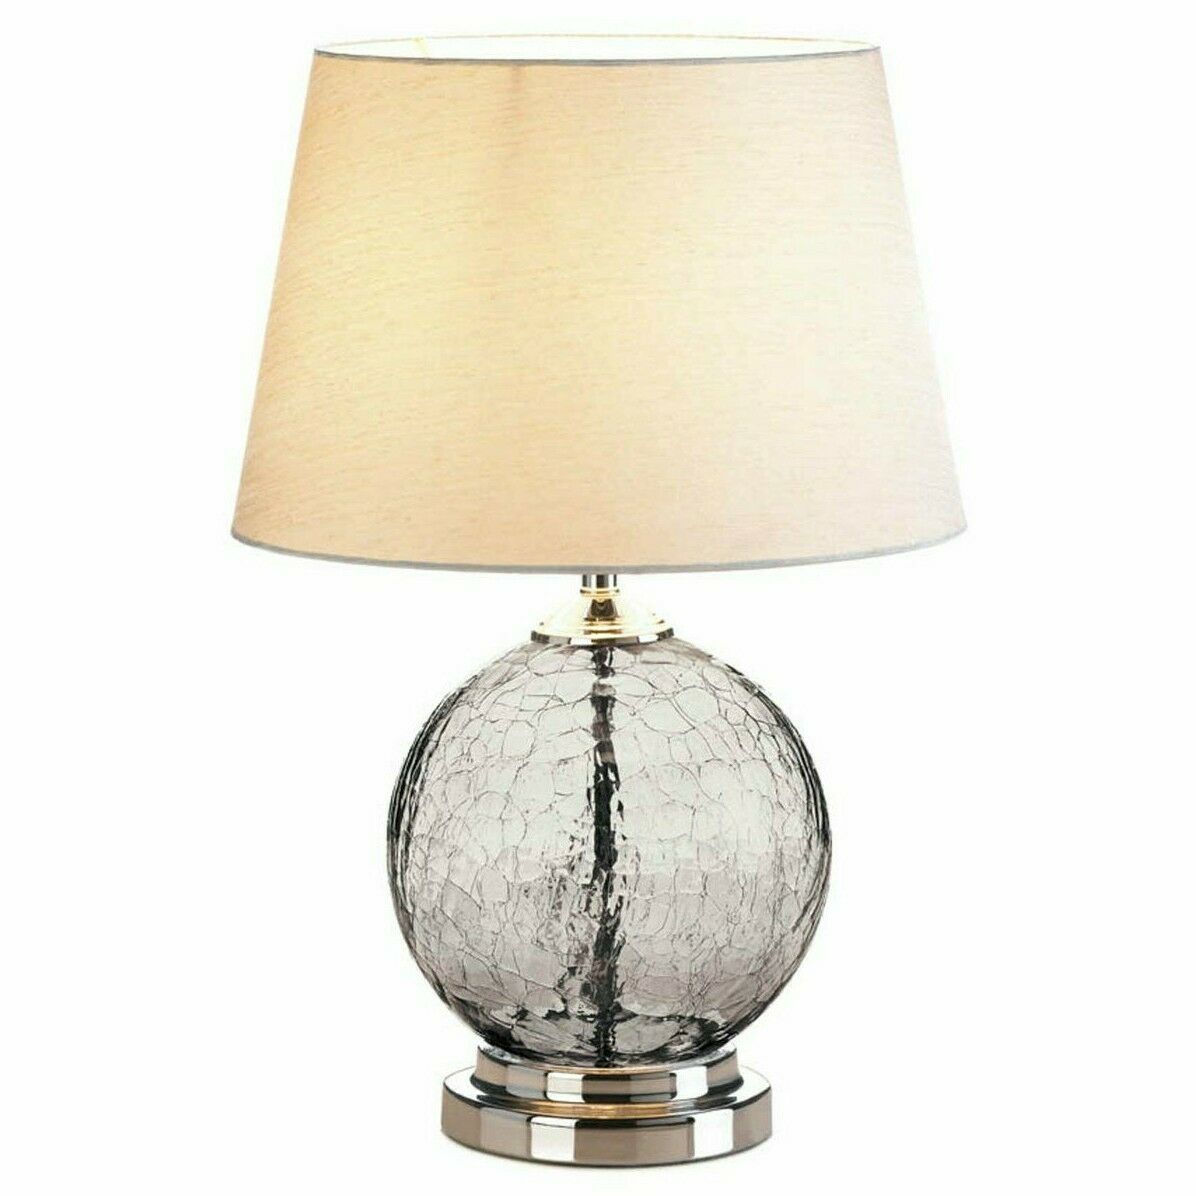 Gray Cracked-Glass Sphere Table LAMP